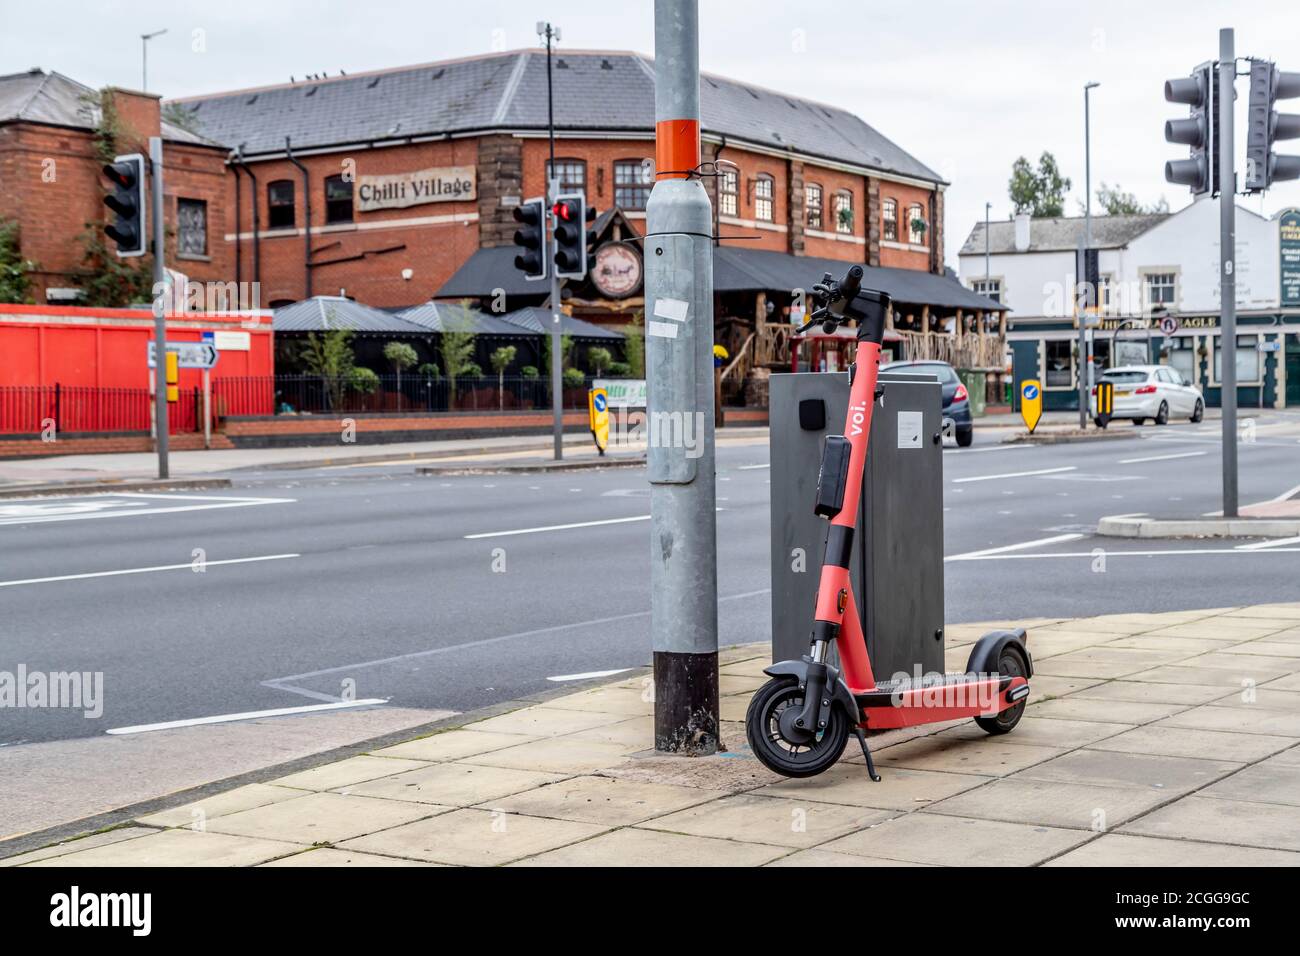 Northampton, UK, 11th September 2020. 300 e-scooters are hitting the streets in Northampton and Kettering in a 12 month trial between Smart Move Northamptonshire and Voi digital e-scooter (photos this morning in the town centre). Riders will need a provisional driver’s licence and the Voi’s app, the e-scooter will cost £1 to unlock + £0.20 per minute and can be left anywhere when finished with, another trial started in Birmingham city center yesterday. Credit: Keith J Smith./Alamy Live News Stock Photo